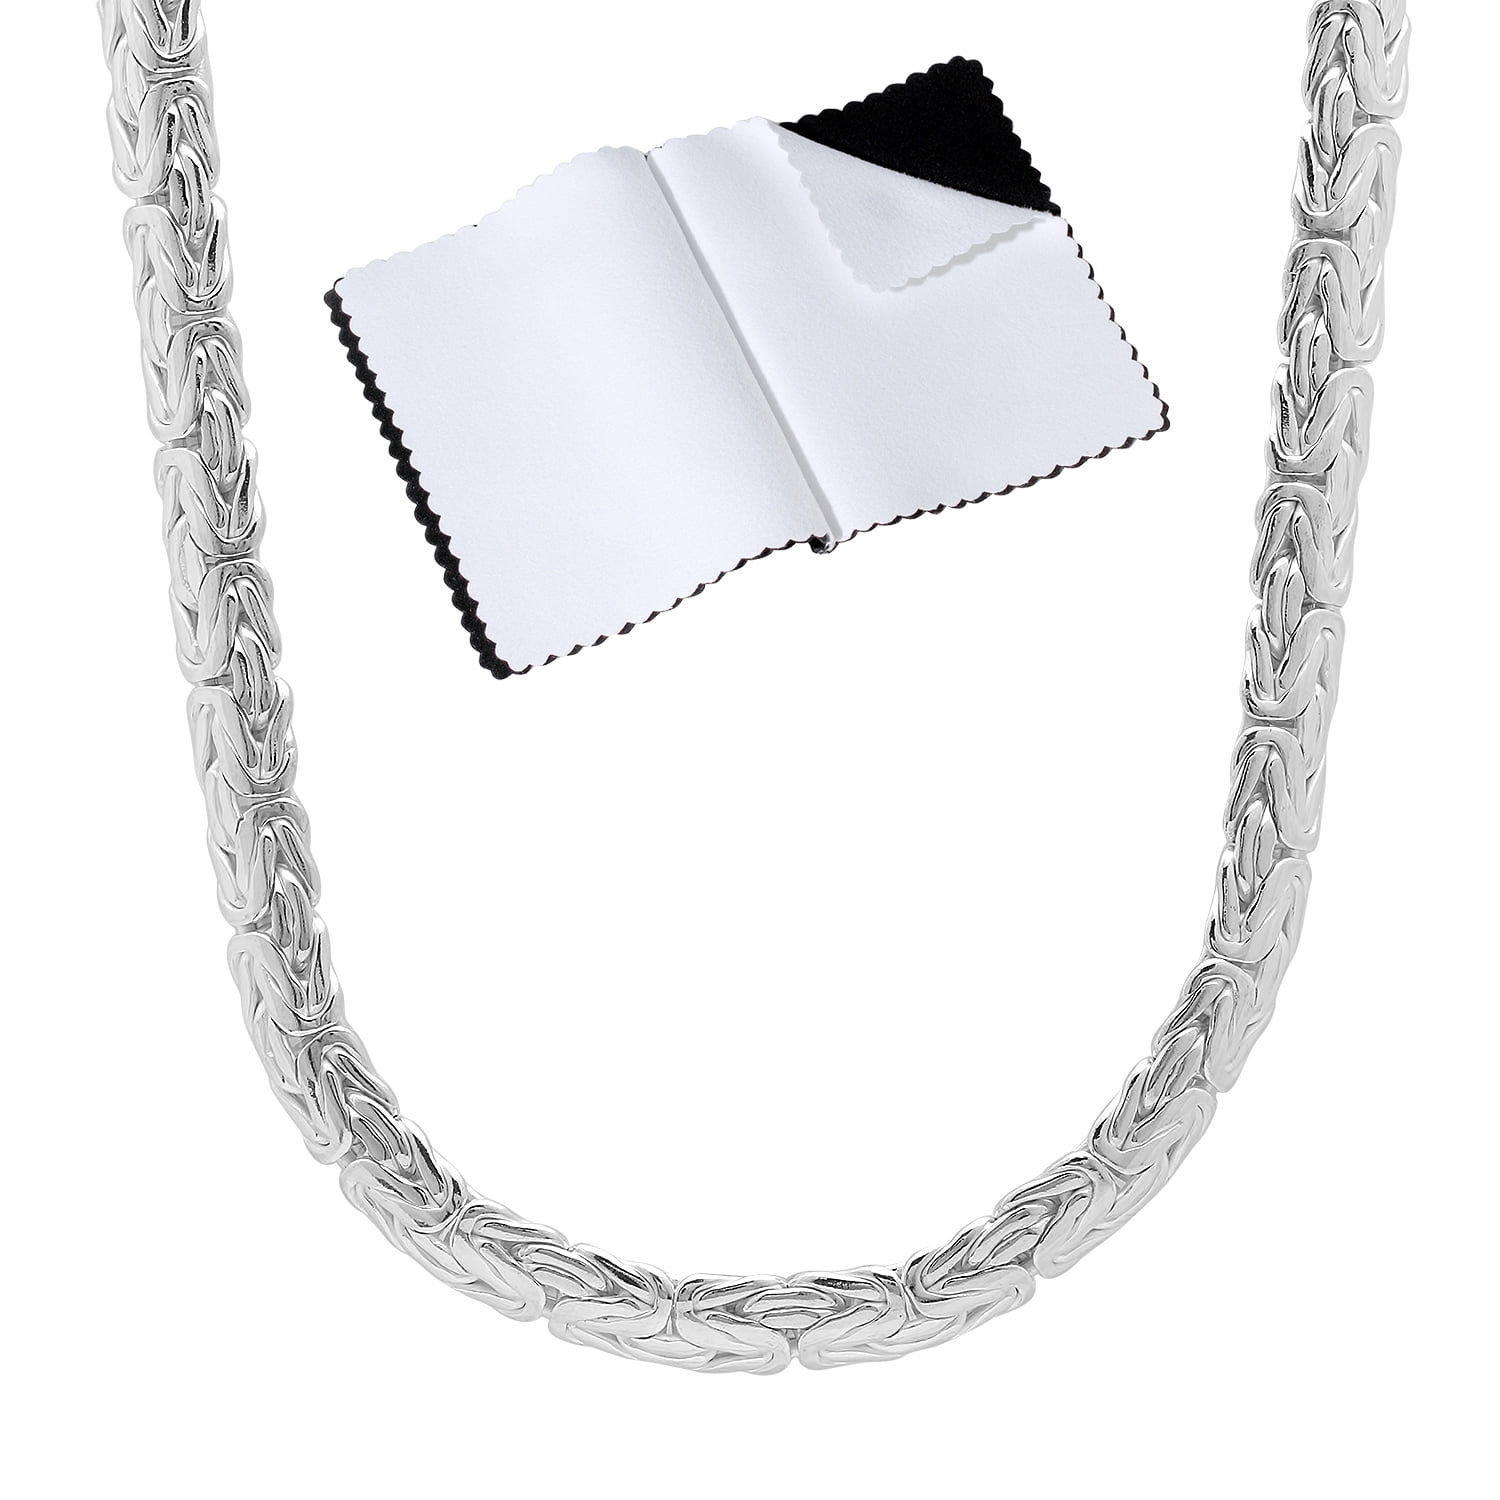 3mm Sterling Silver Solid Flat Rope Chain Necklace, 18 Inch